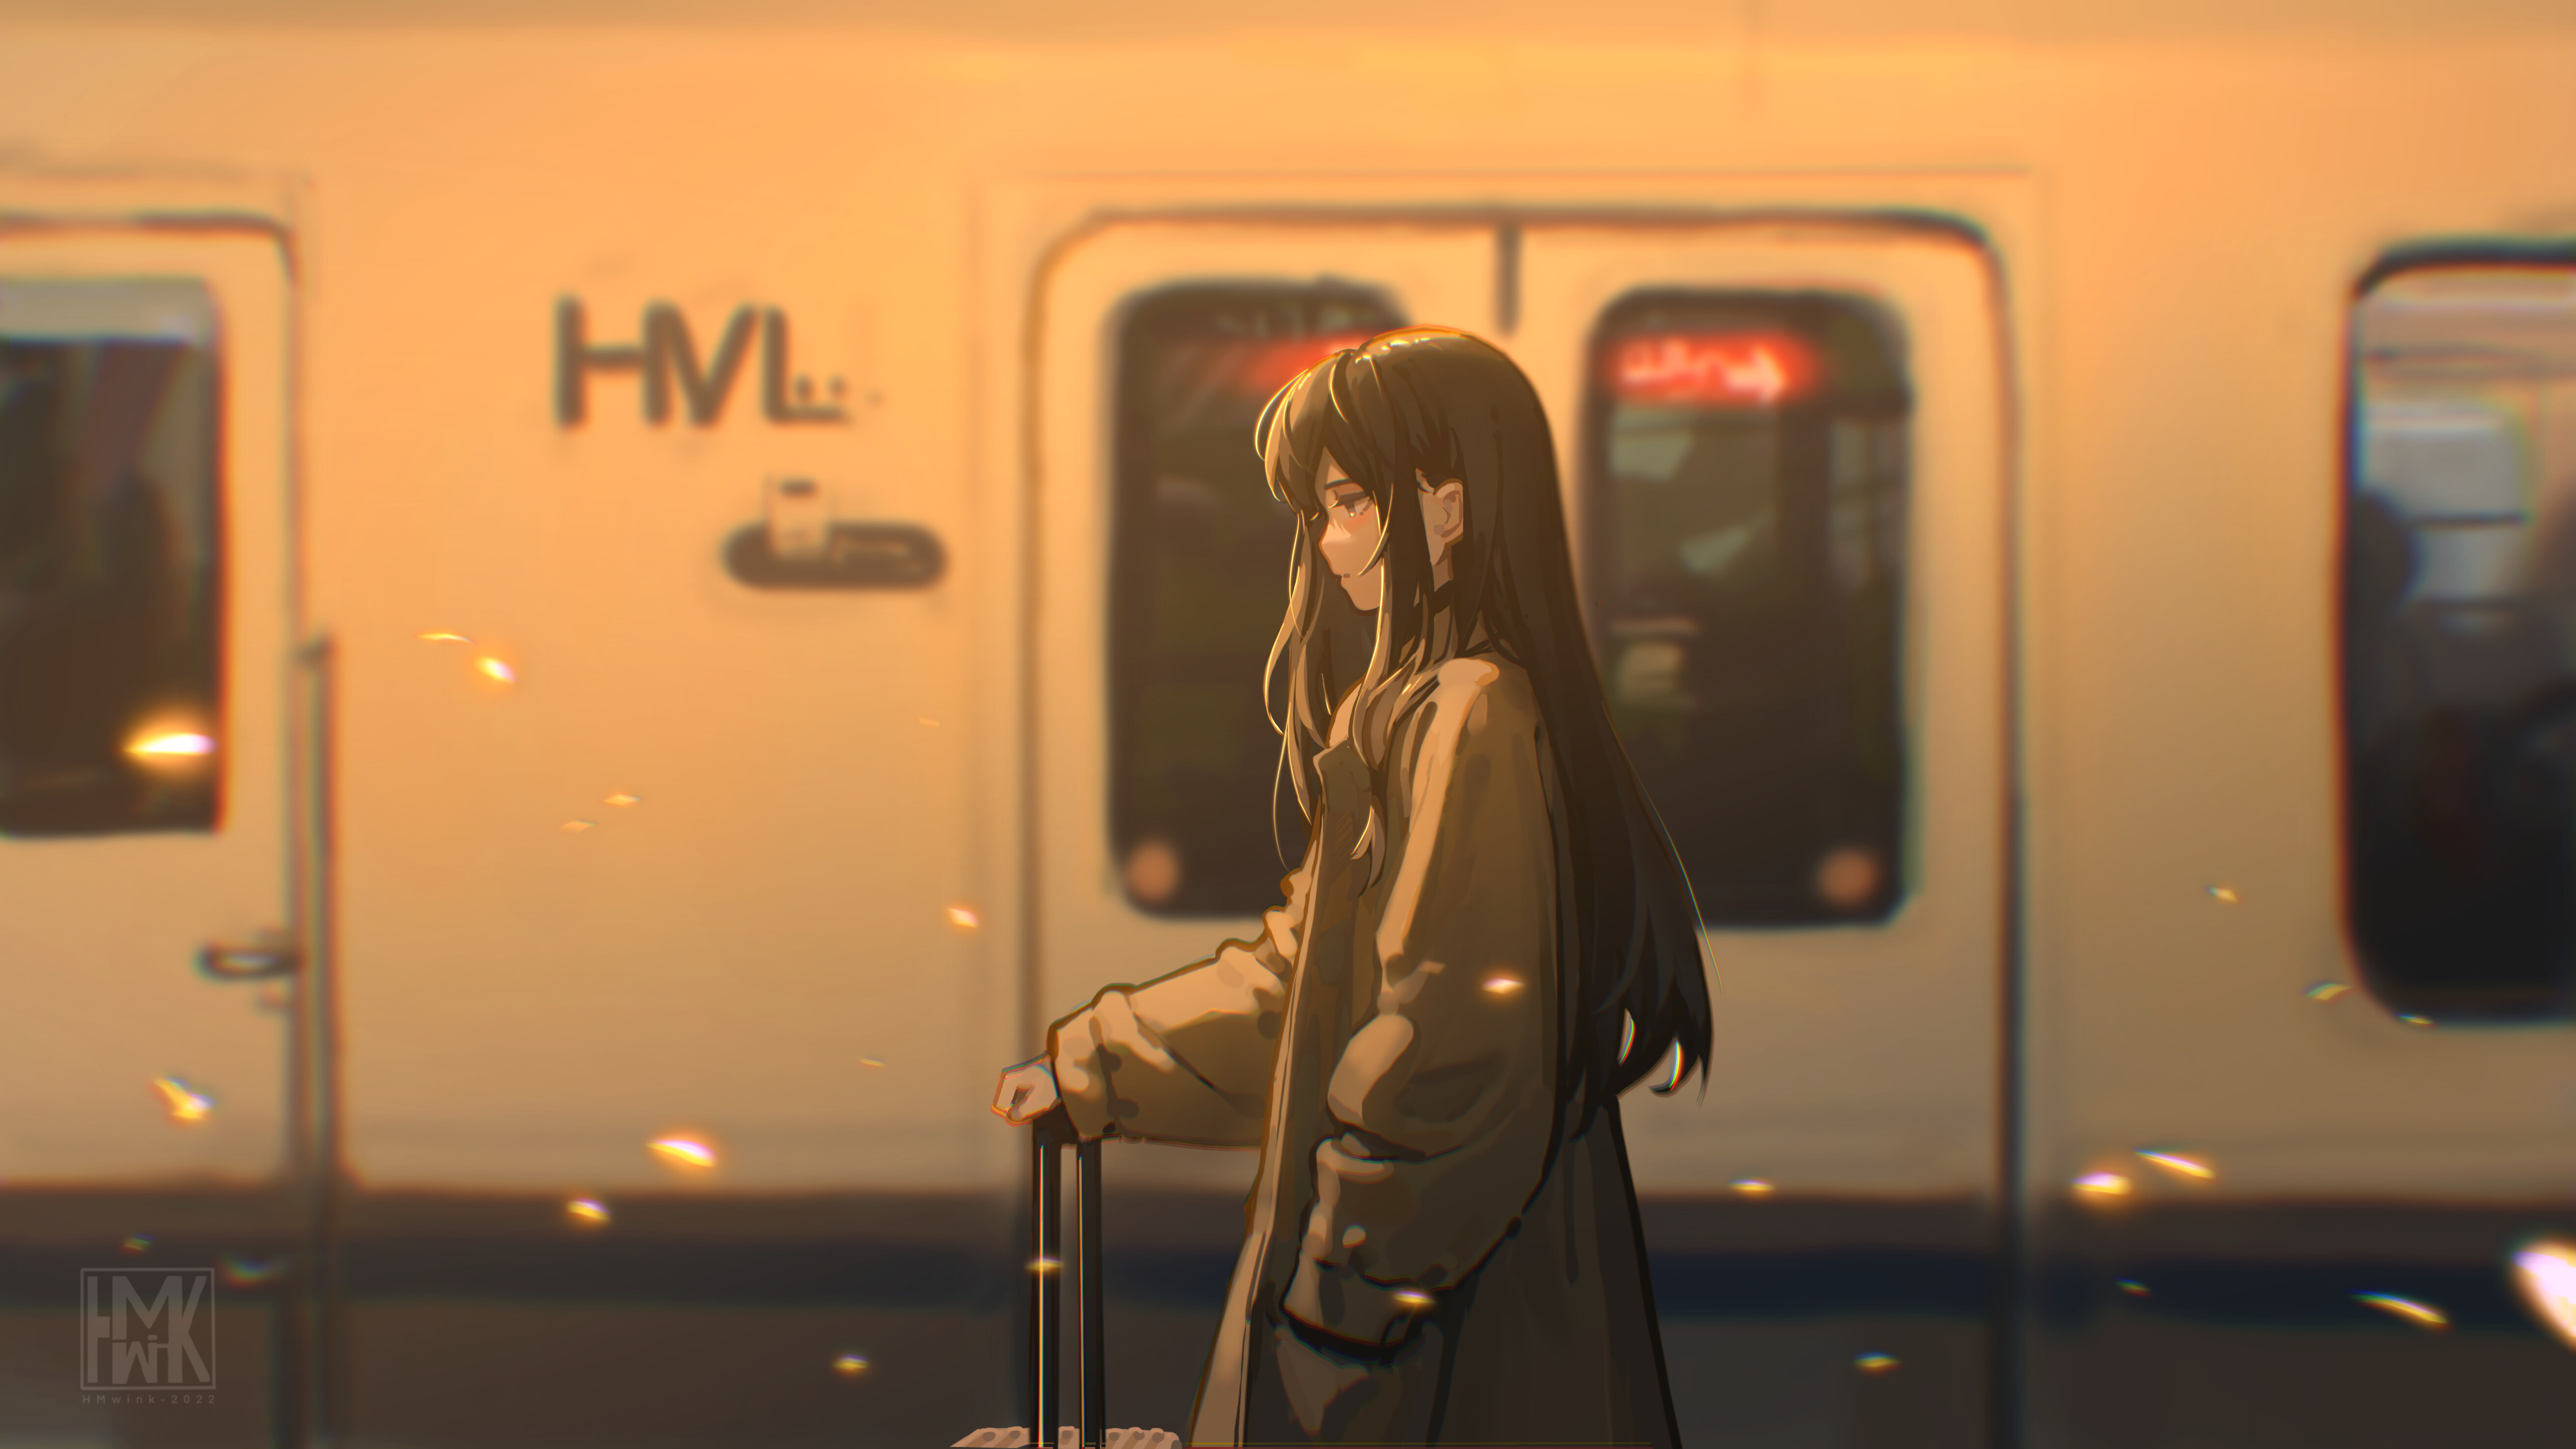 Hua Ming Wink Anime Girls Train Station Train Hands In Pockets 5243x2950